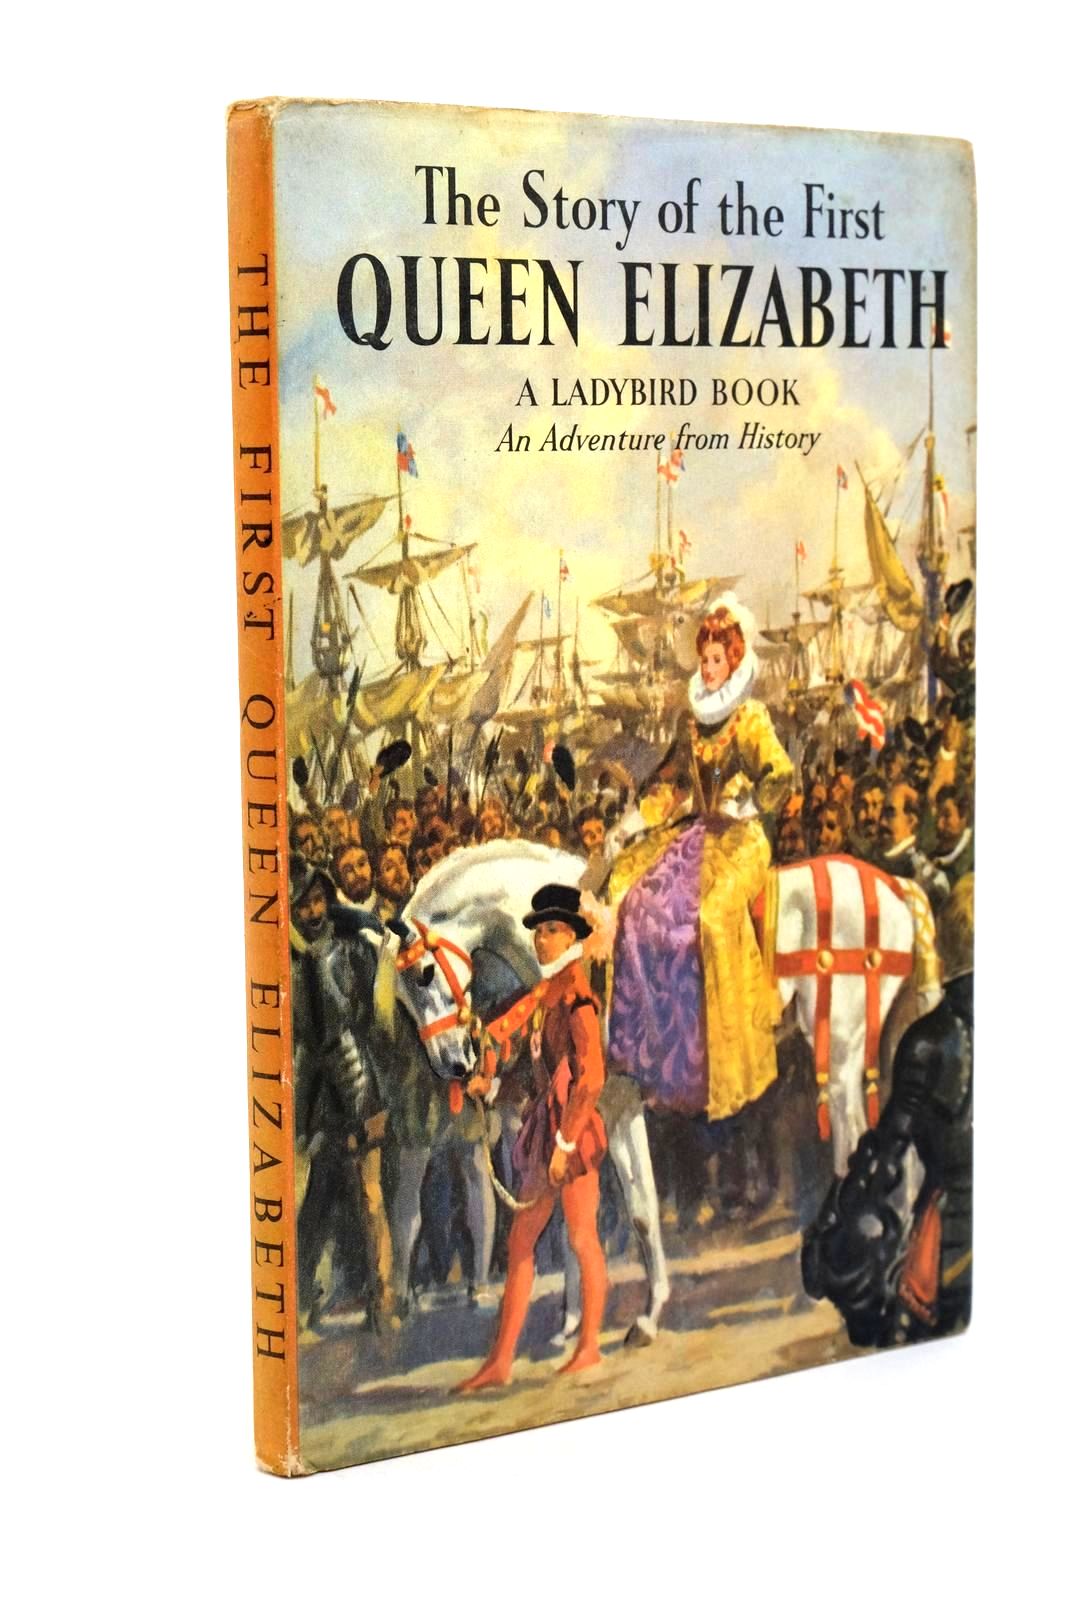 Photo of THE STORY OF THE FIRST QUEEN ELIZABETH written by Peach, L. Du Garde illustrated by Kenney, John published by Wills & Hepworth Ltd. (STOCK CODE: 1321728)  for sale by Stella & Rose's Books